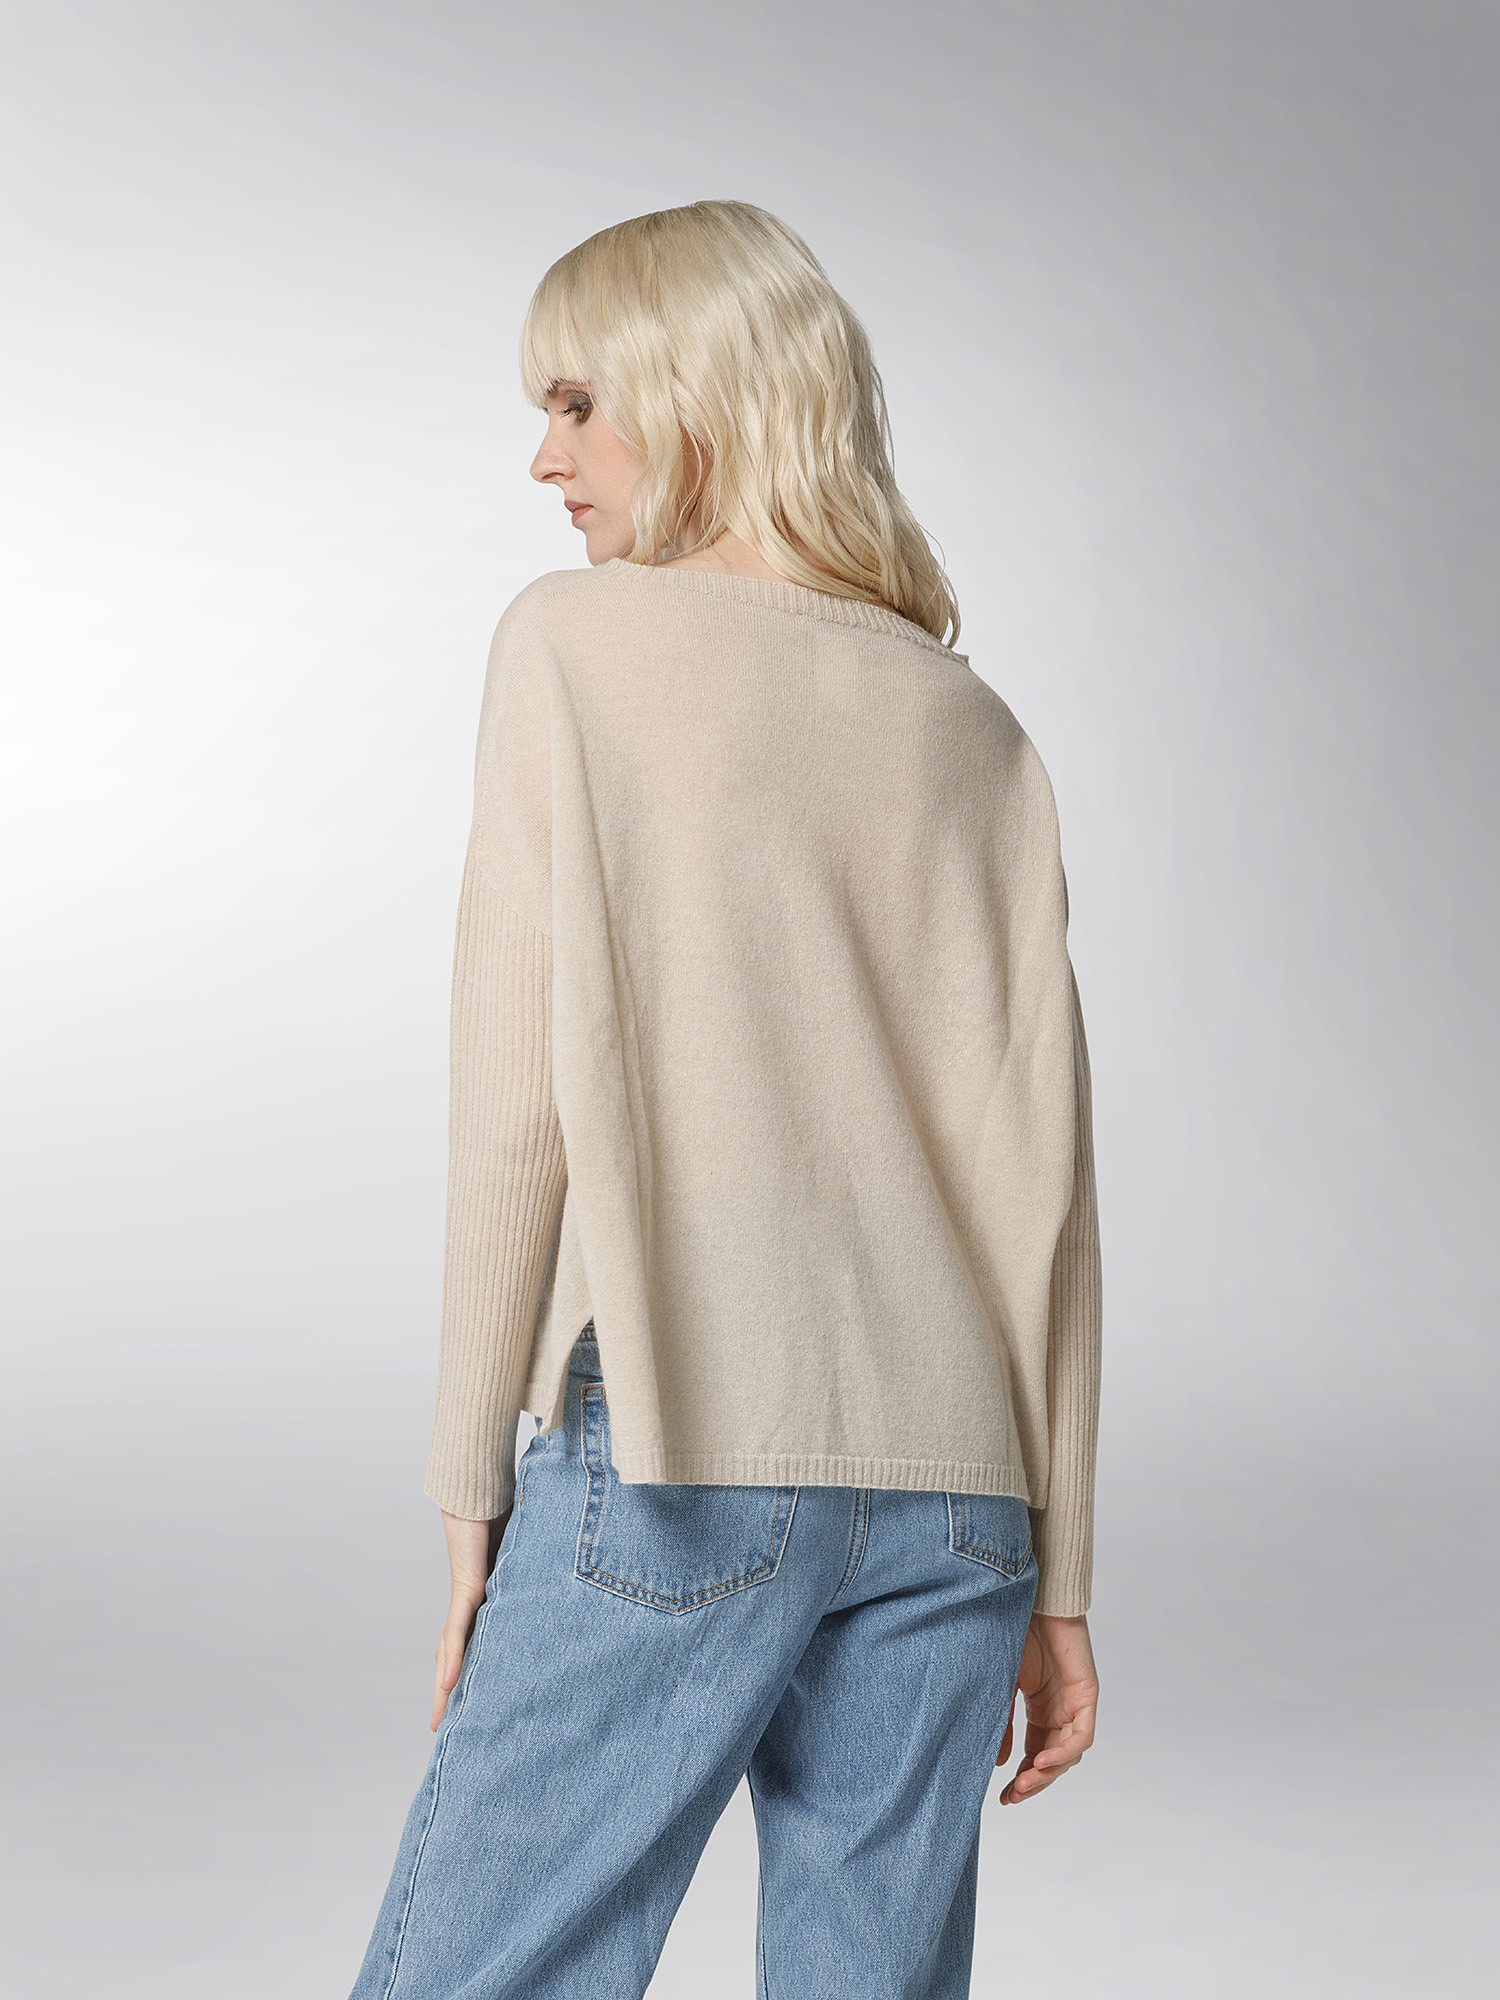 K Collection - Maglia girocollo, Beige, large image number 4